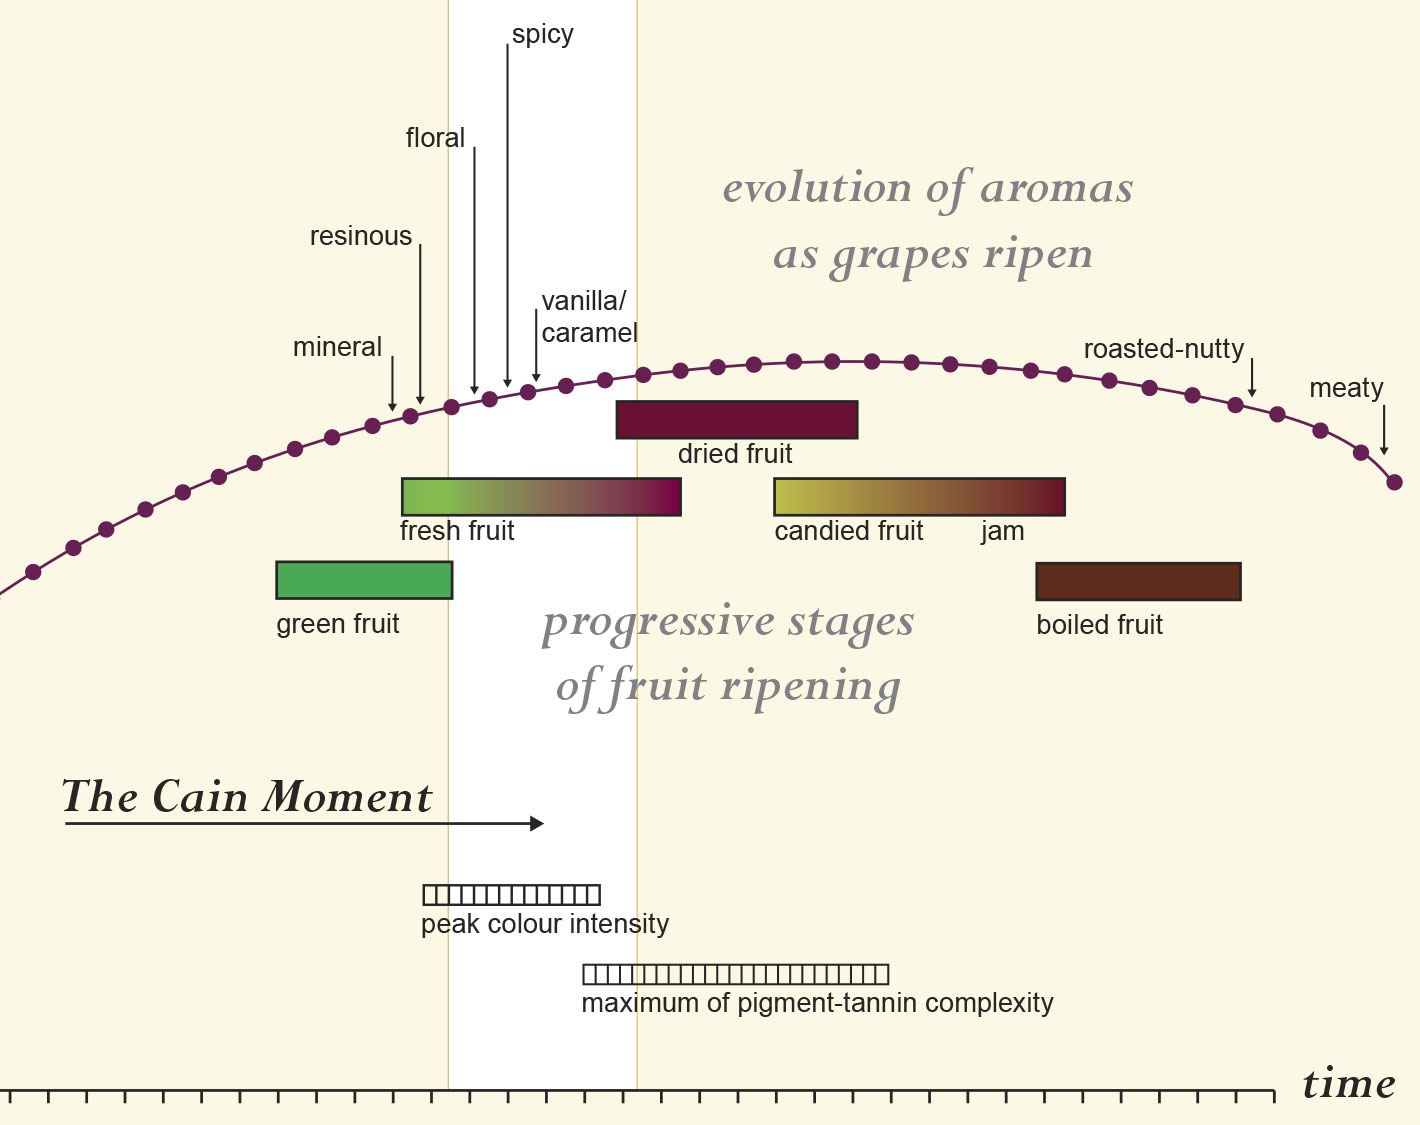 The Continuum of Ripening and the Cain Moment